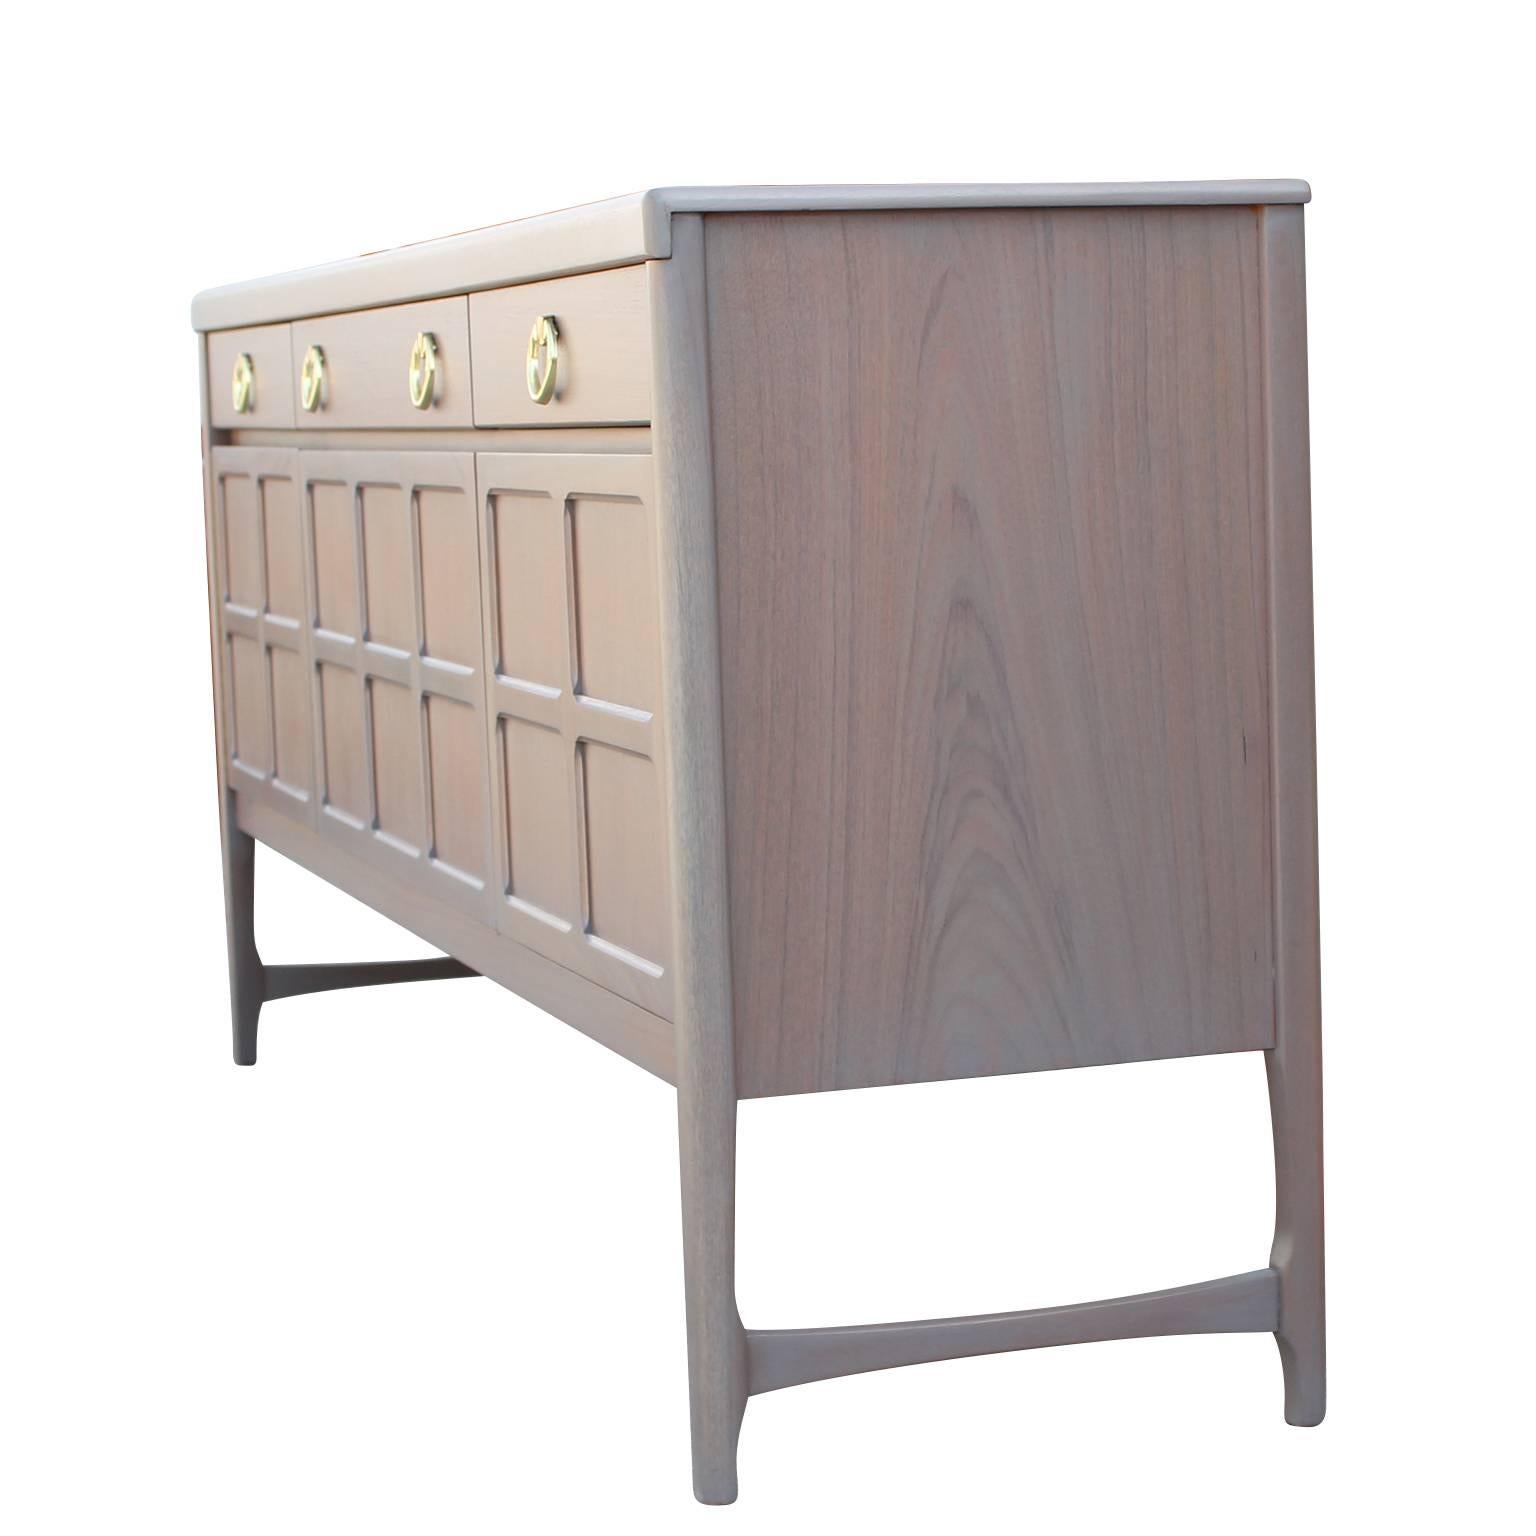 Modern Hollywood Regency sideboard richly refinished in a grey wash with a blush undertone and brass ring handles. This credenza features three drawers at the top; one with dividers, making it easy to keep organized and shelving on the bottom.